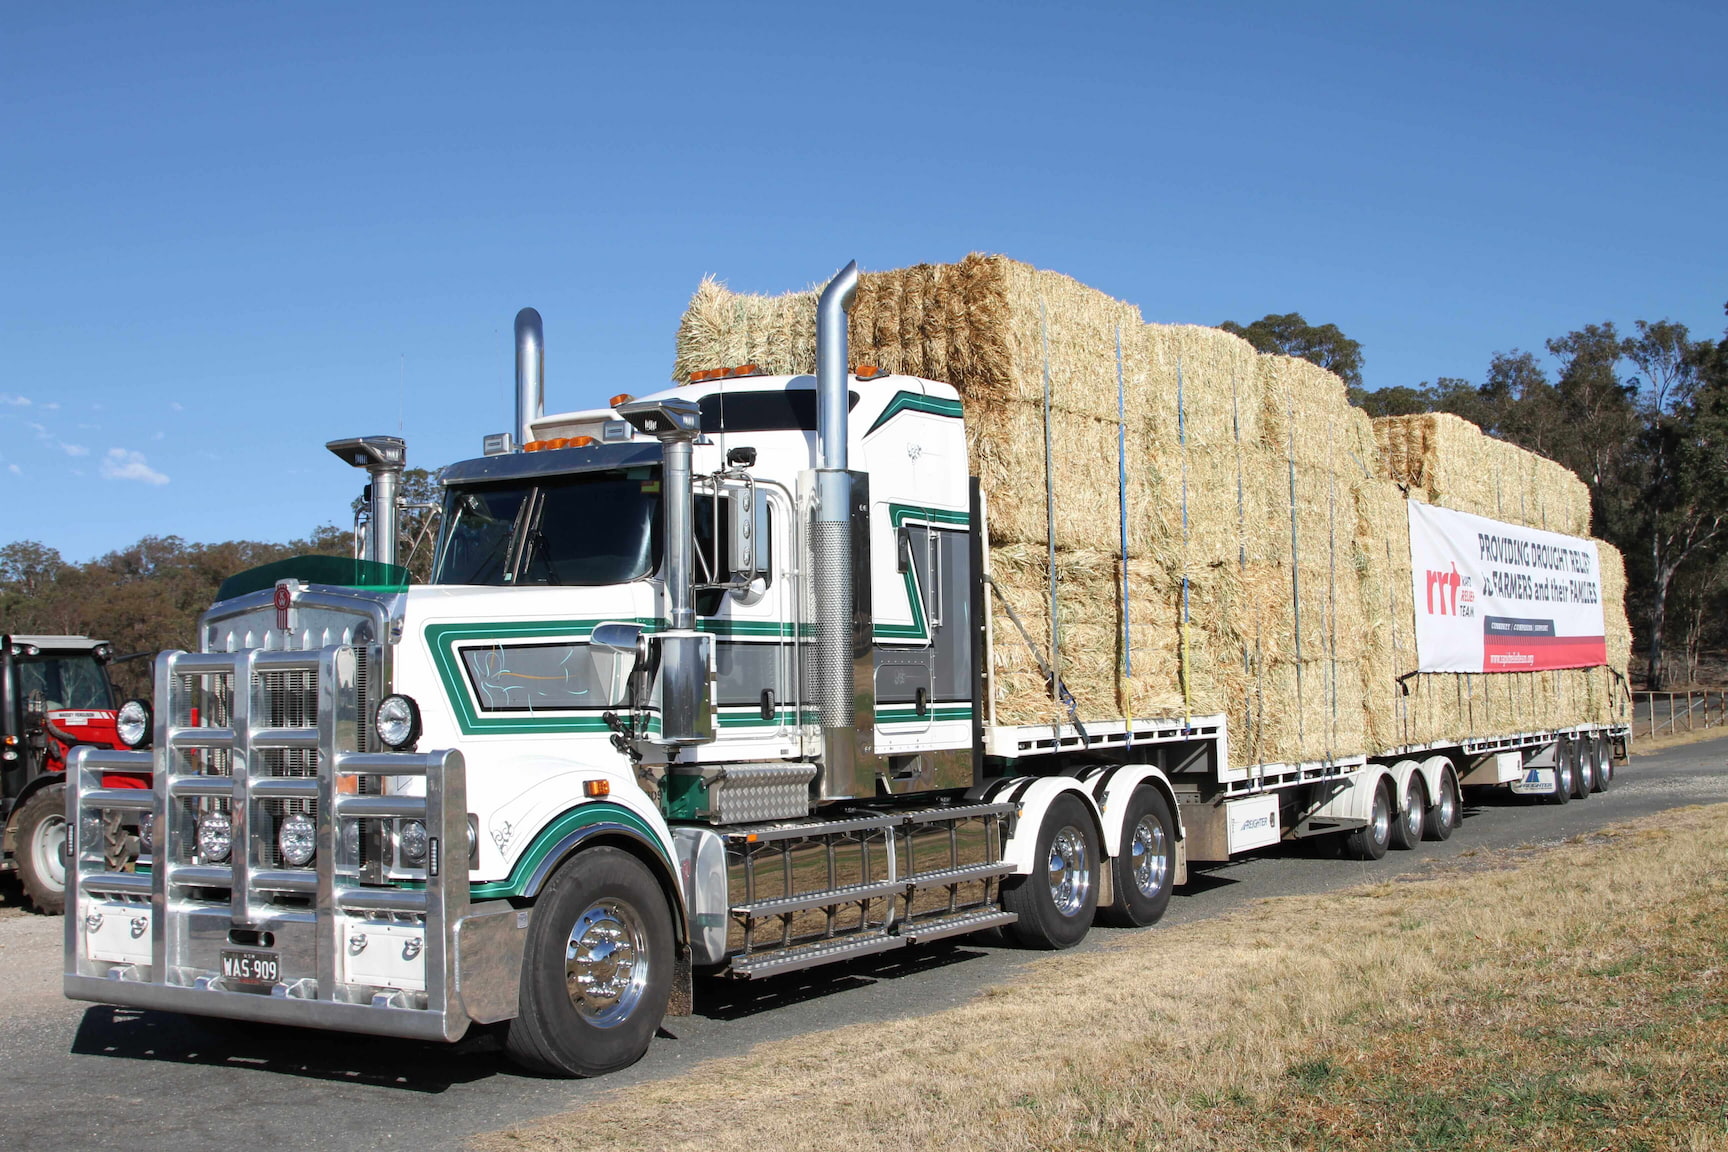 Operation Drought Relief Charity Organisation RRT donated approximately 2000 bales from WA for Drought Stricken Farmers